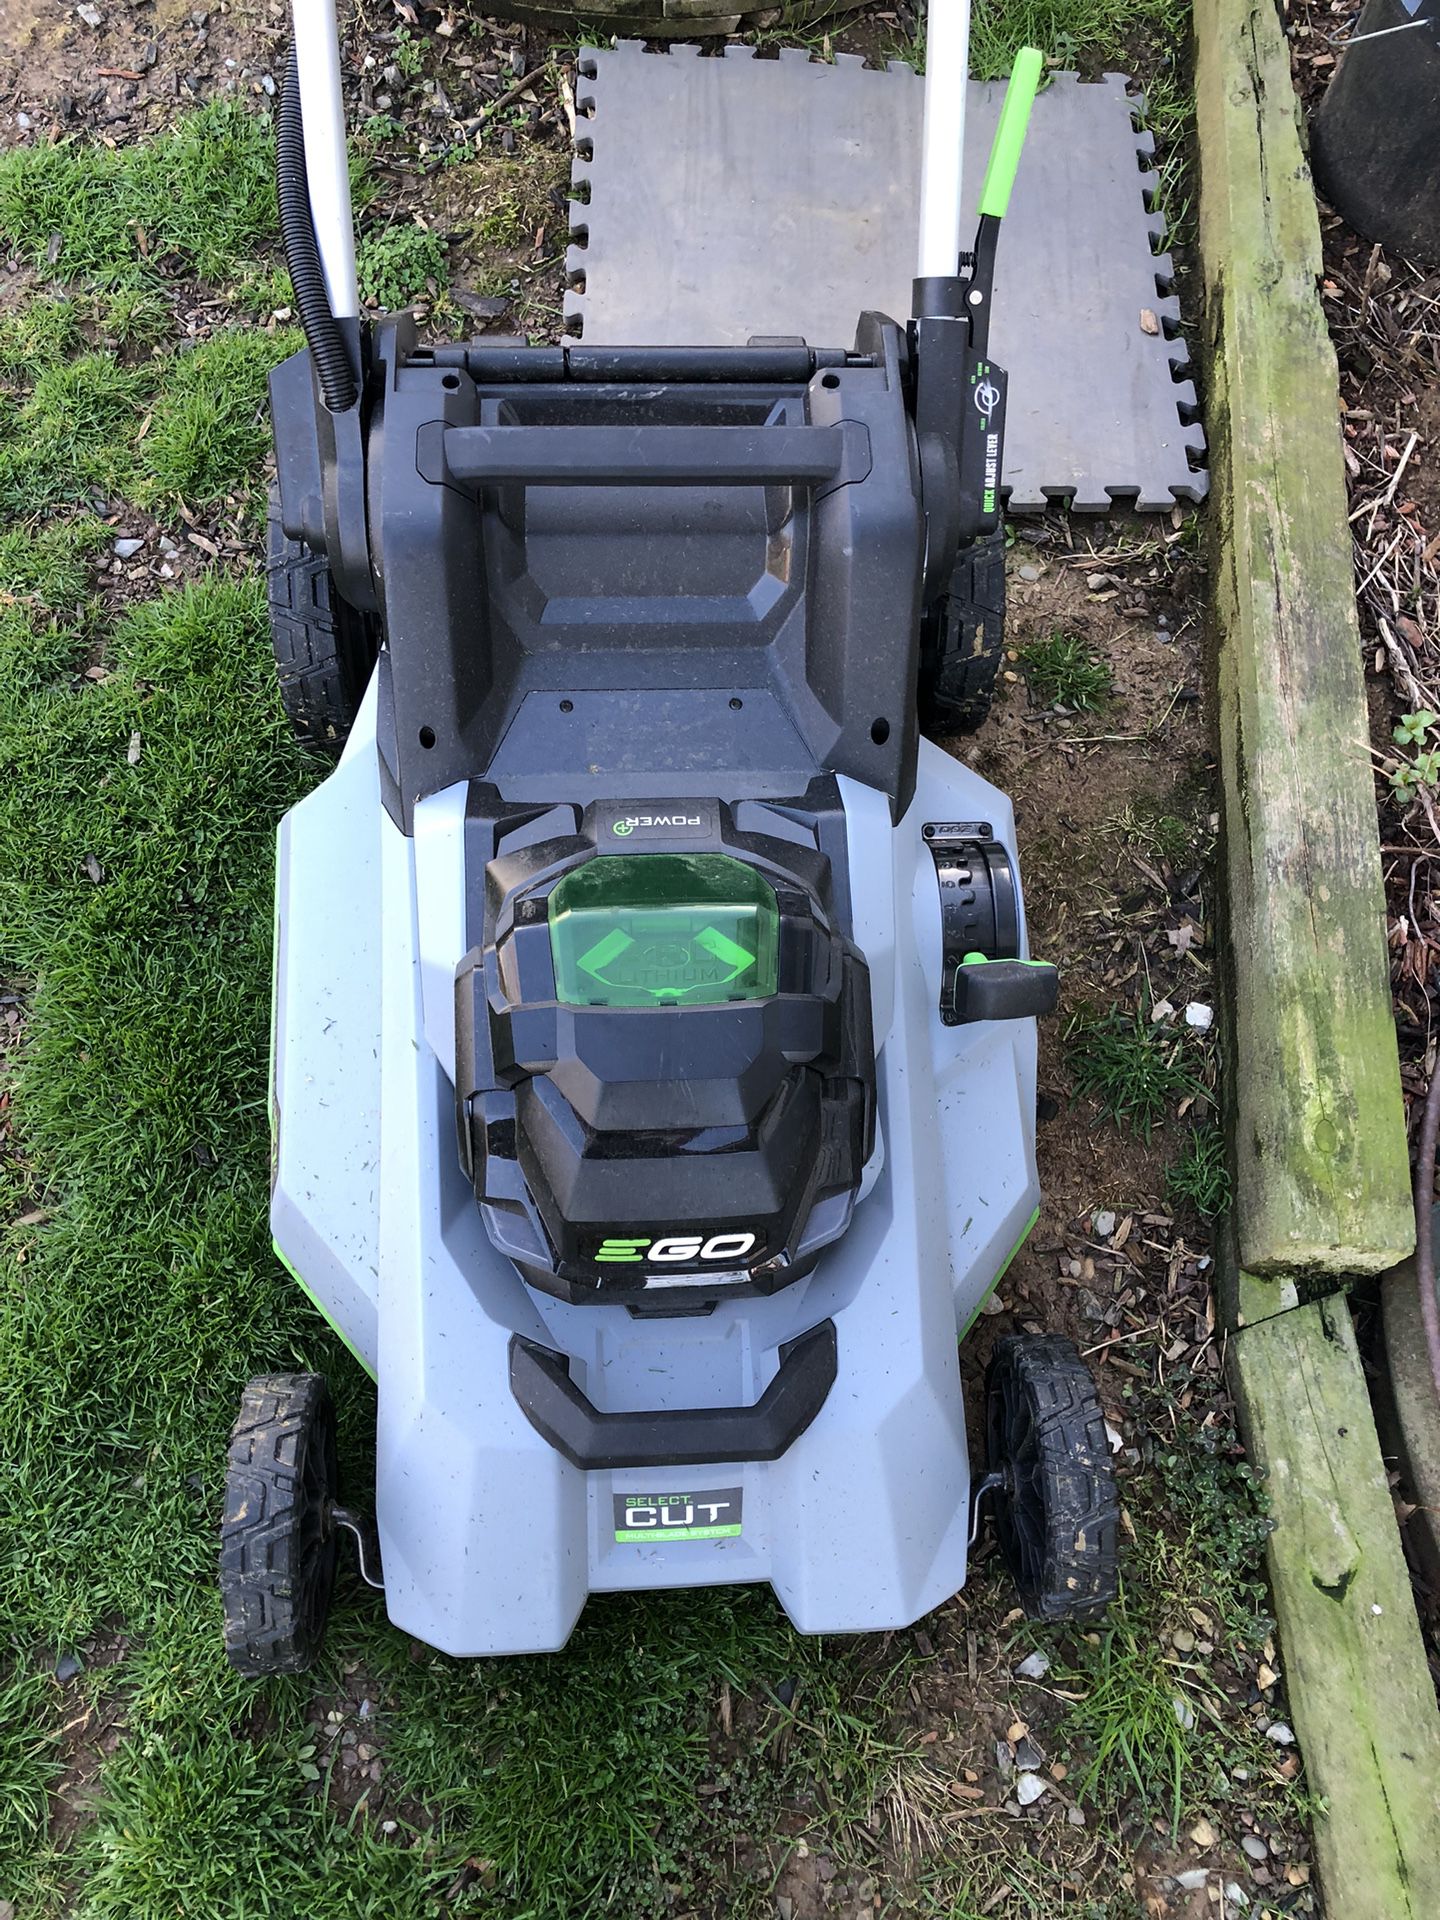 EGO LM2130SP 56 Volts Battery Power Lawn Mower 